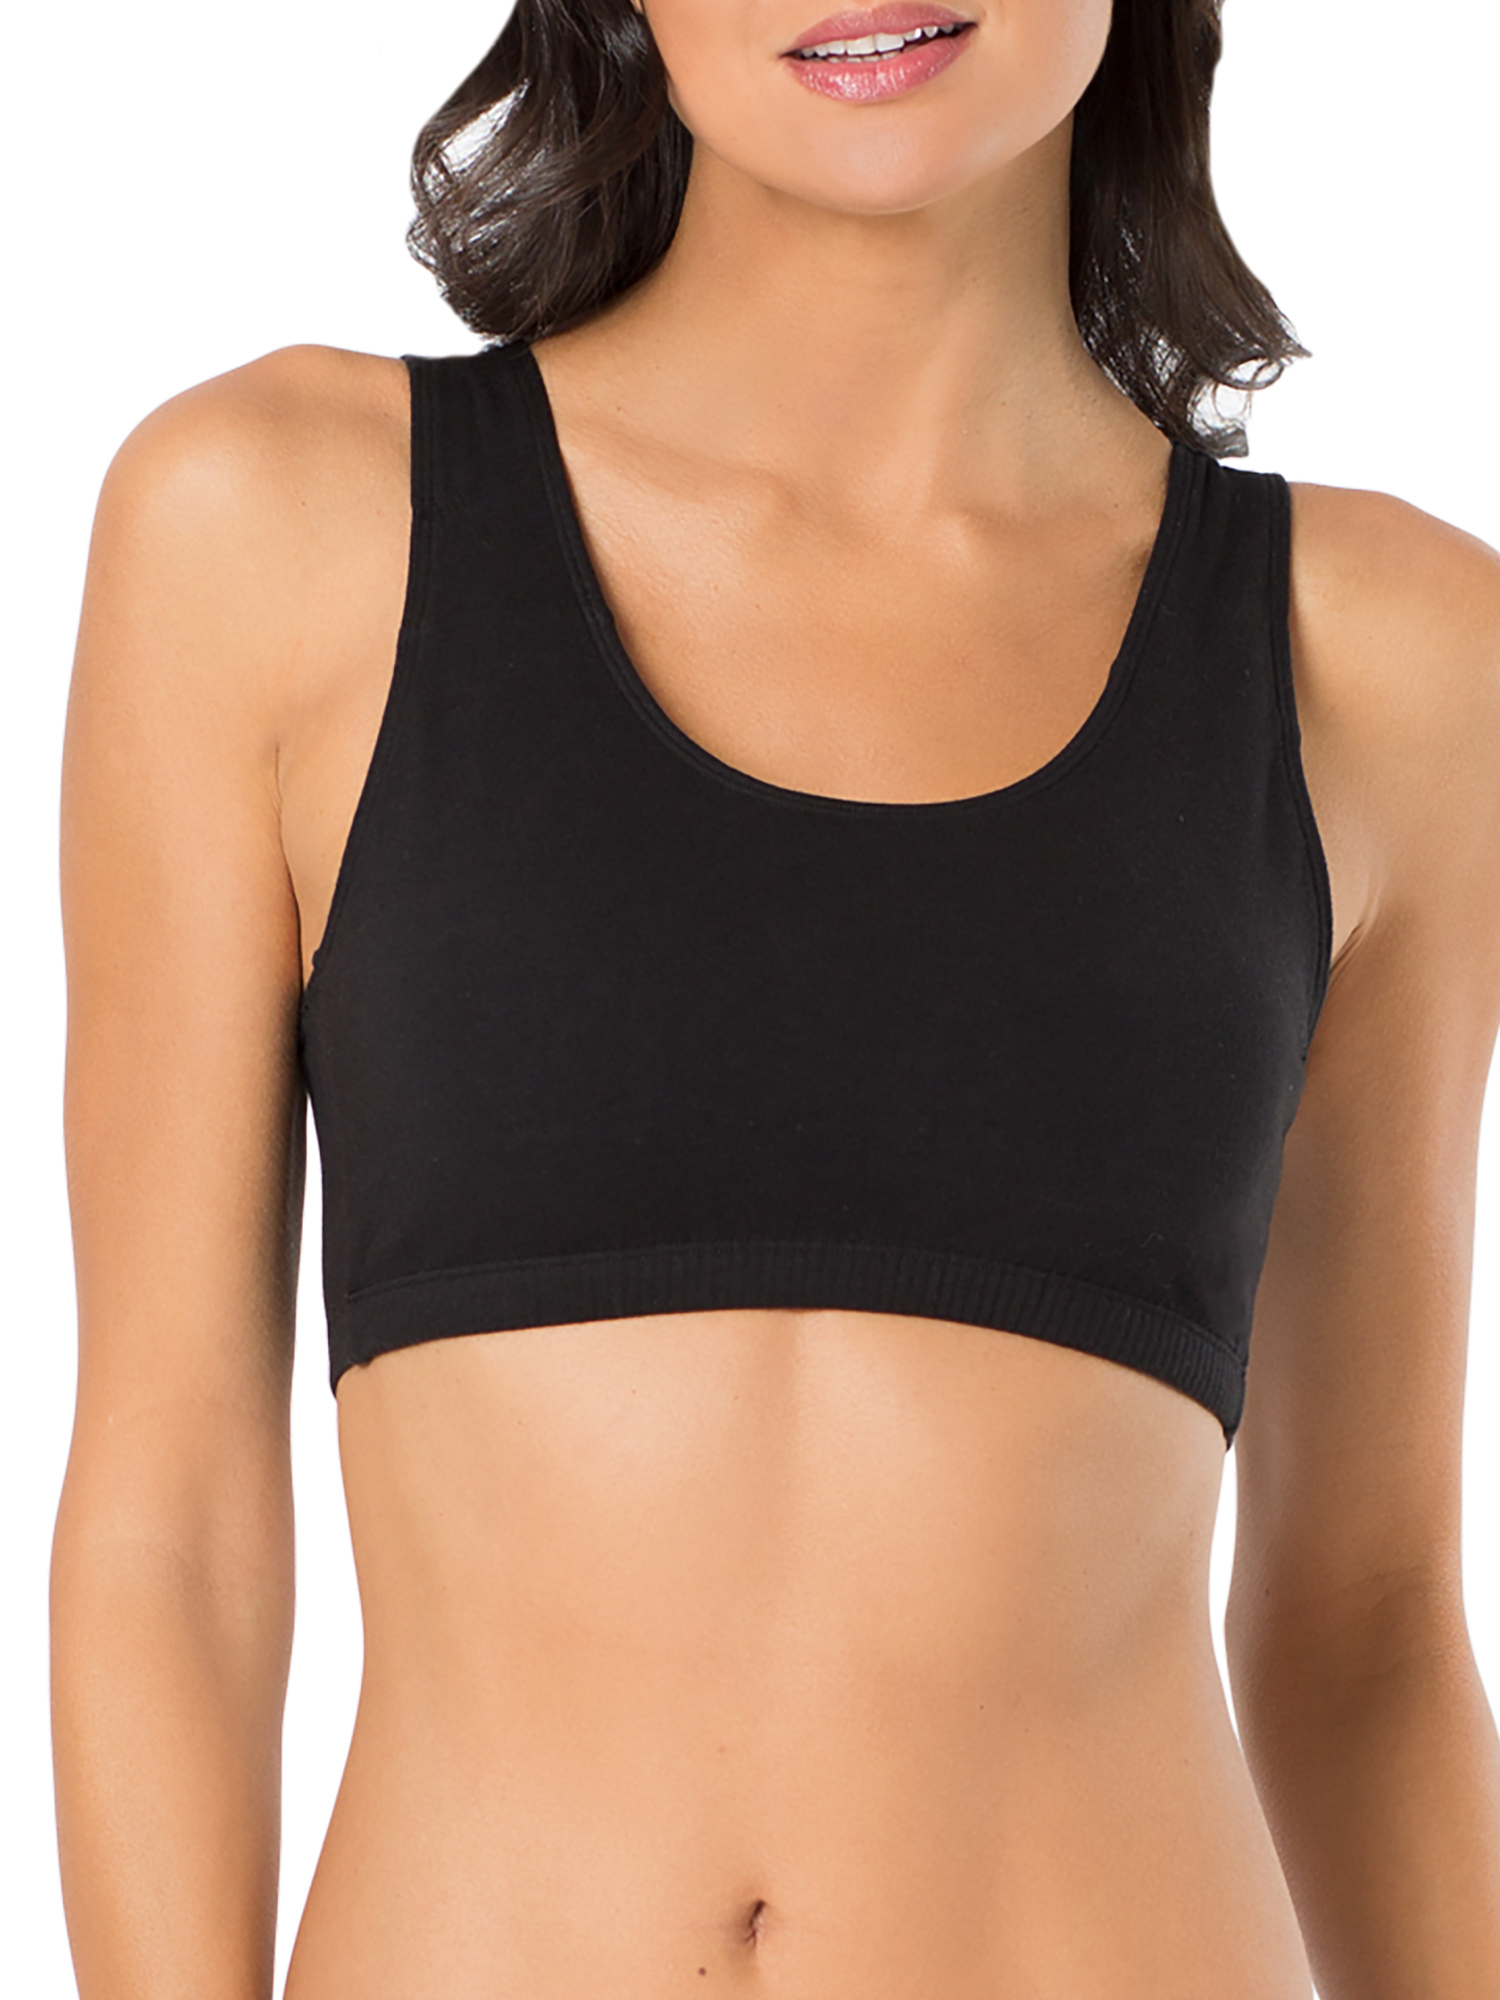 Fruit of the Loom Women's Tank Style Cotton Sports Bra, 3-Pack, Style-9012 - image 2 of 9